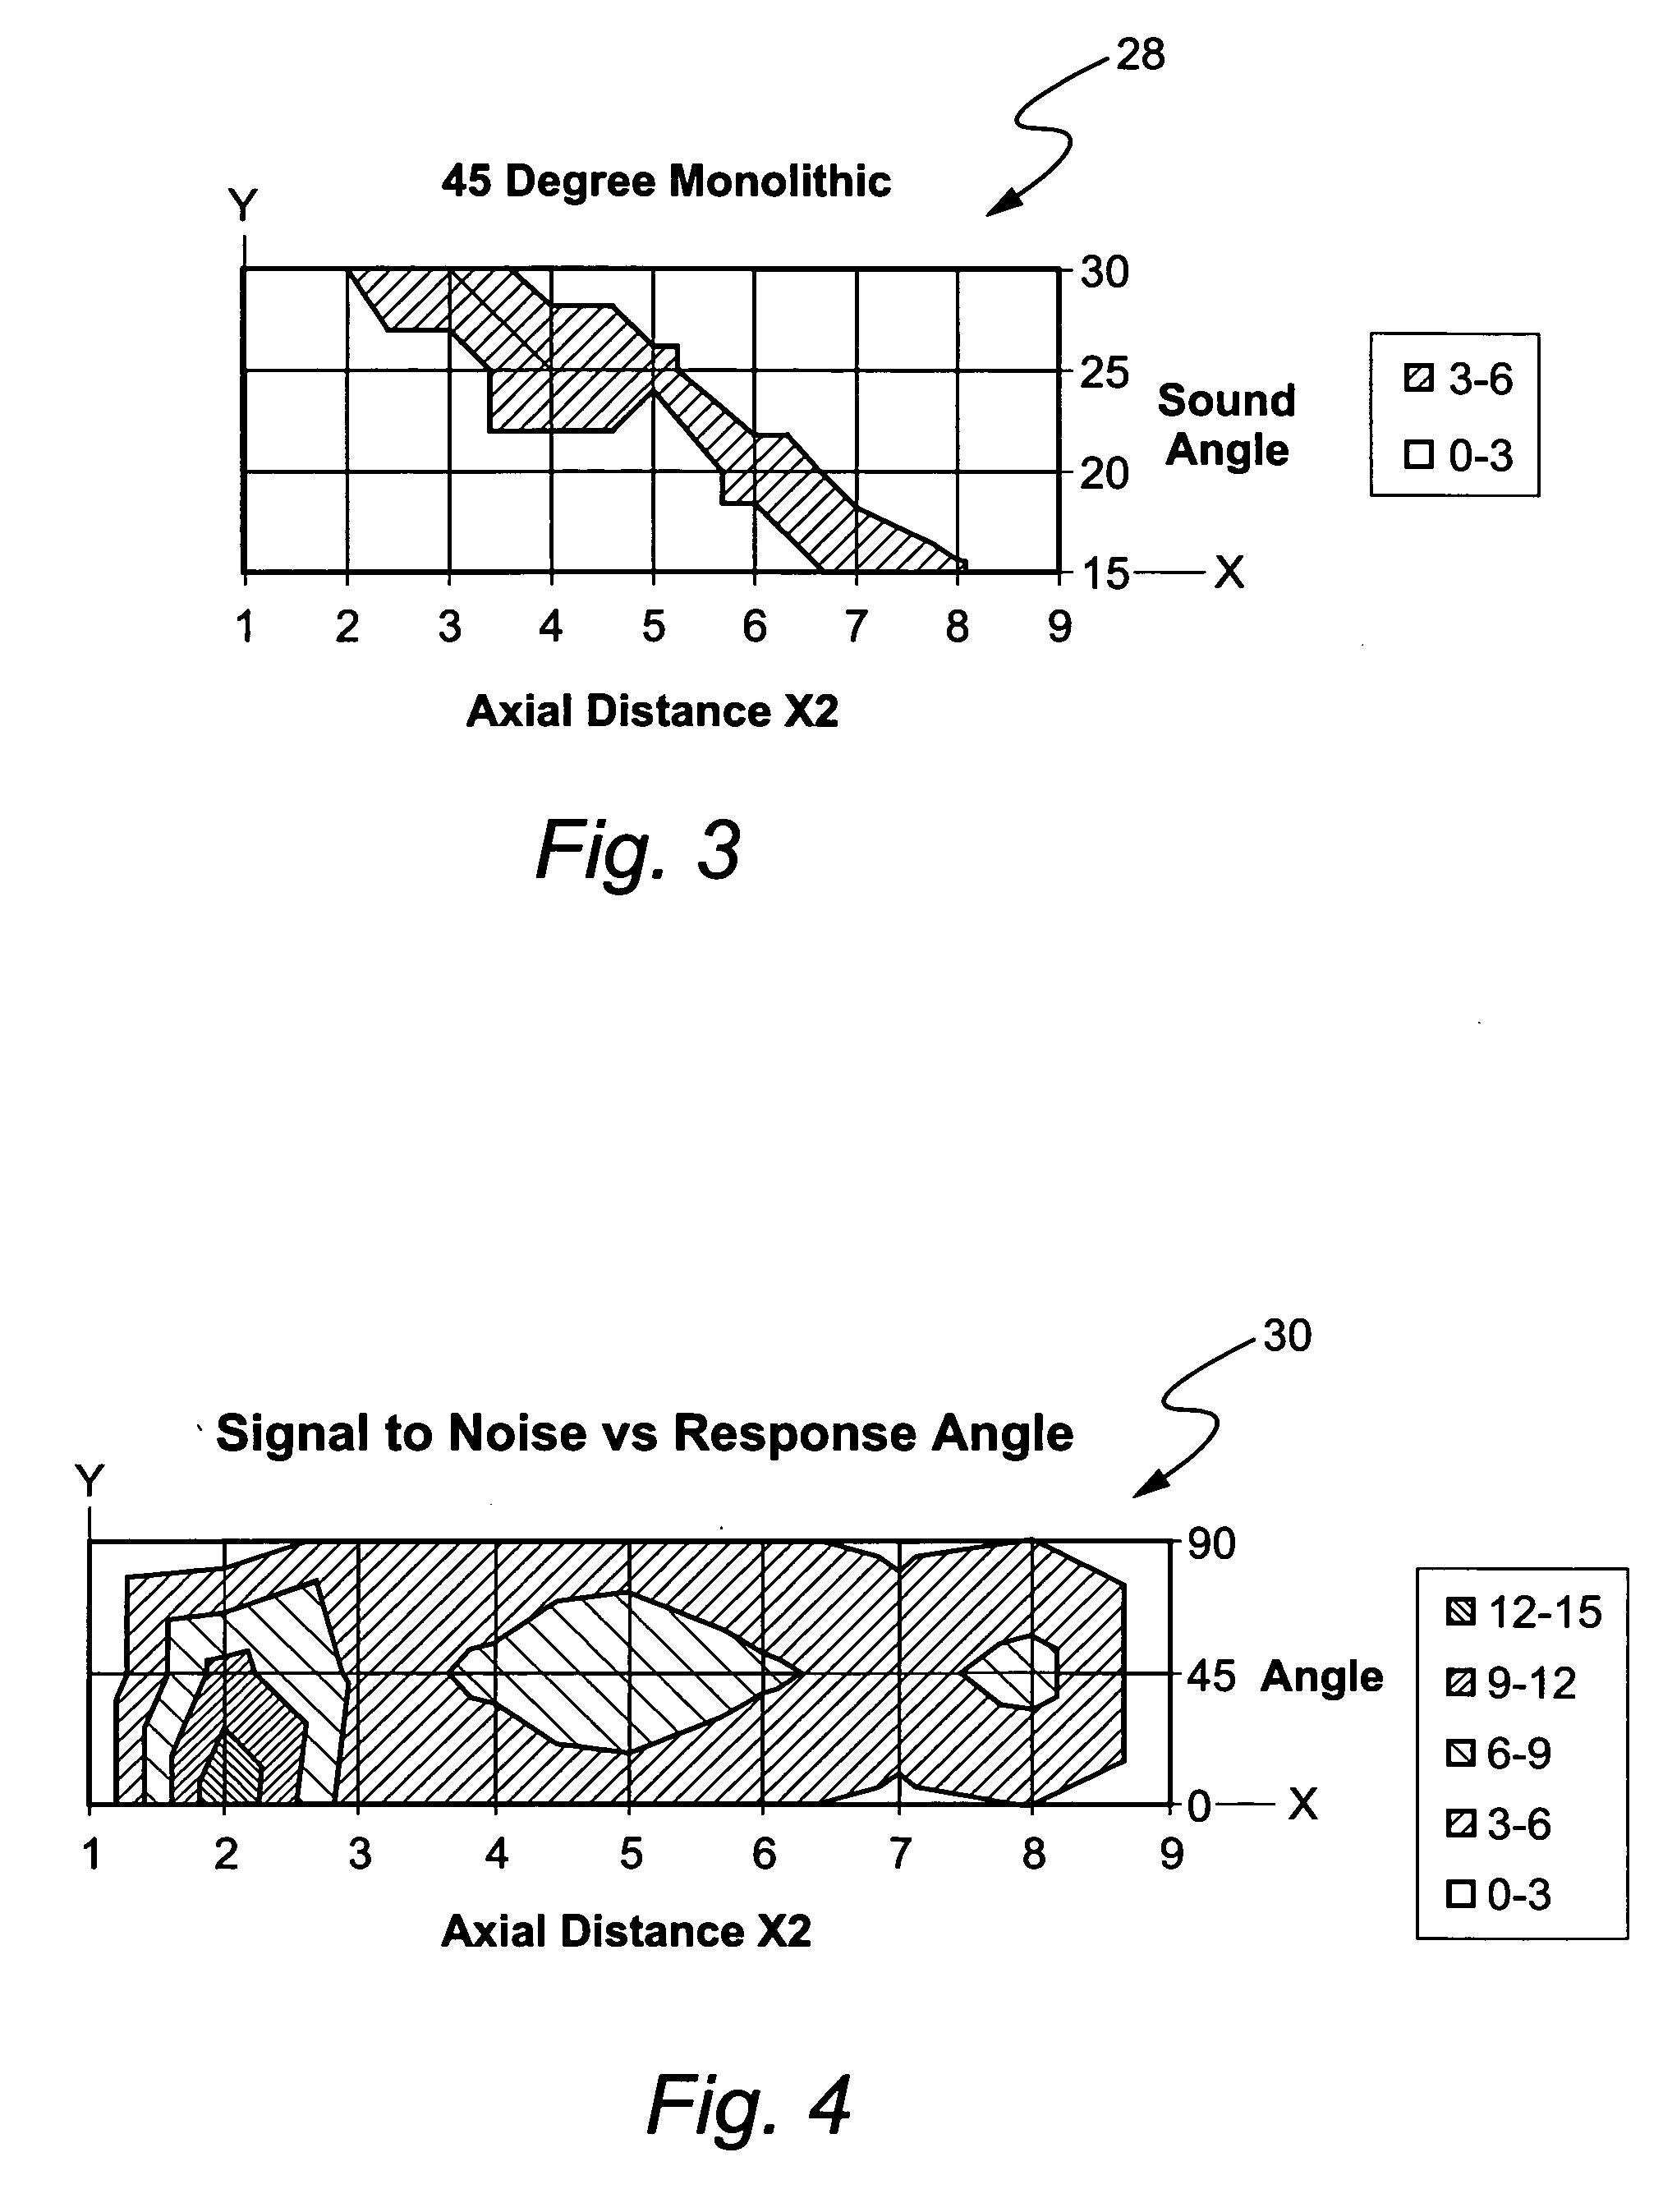 Method of ultrasonically inspecting airfoils